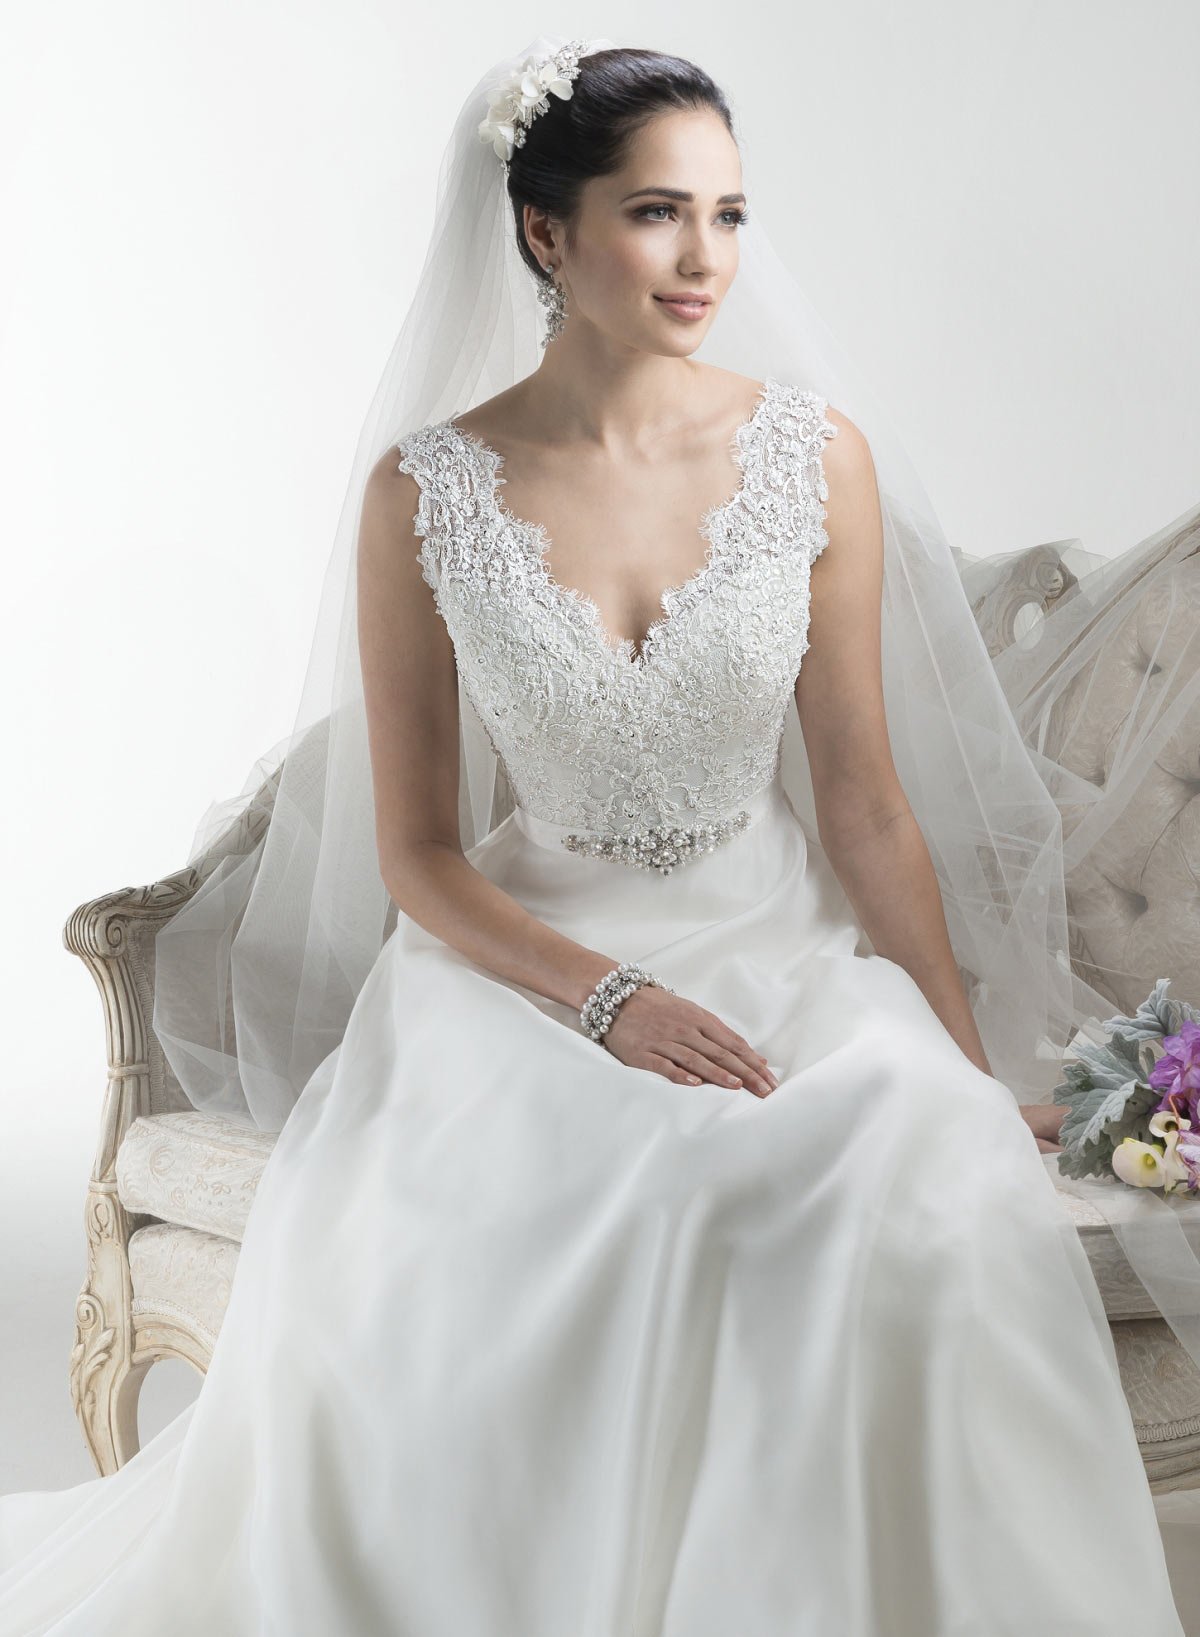 Latest Maggie Sottero dresses at Pirouette 